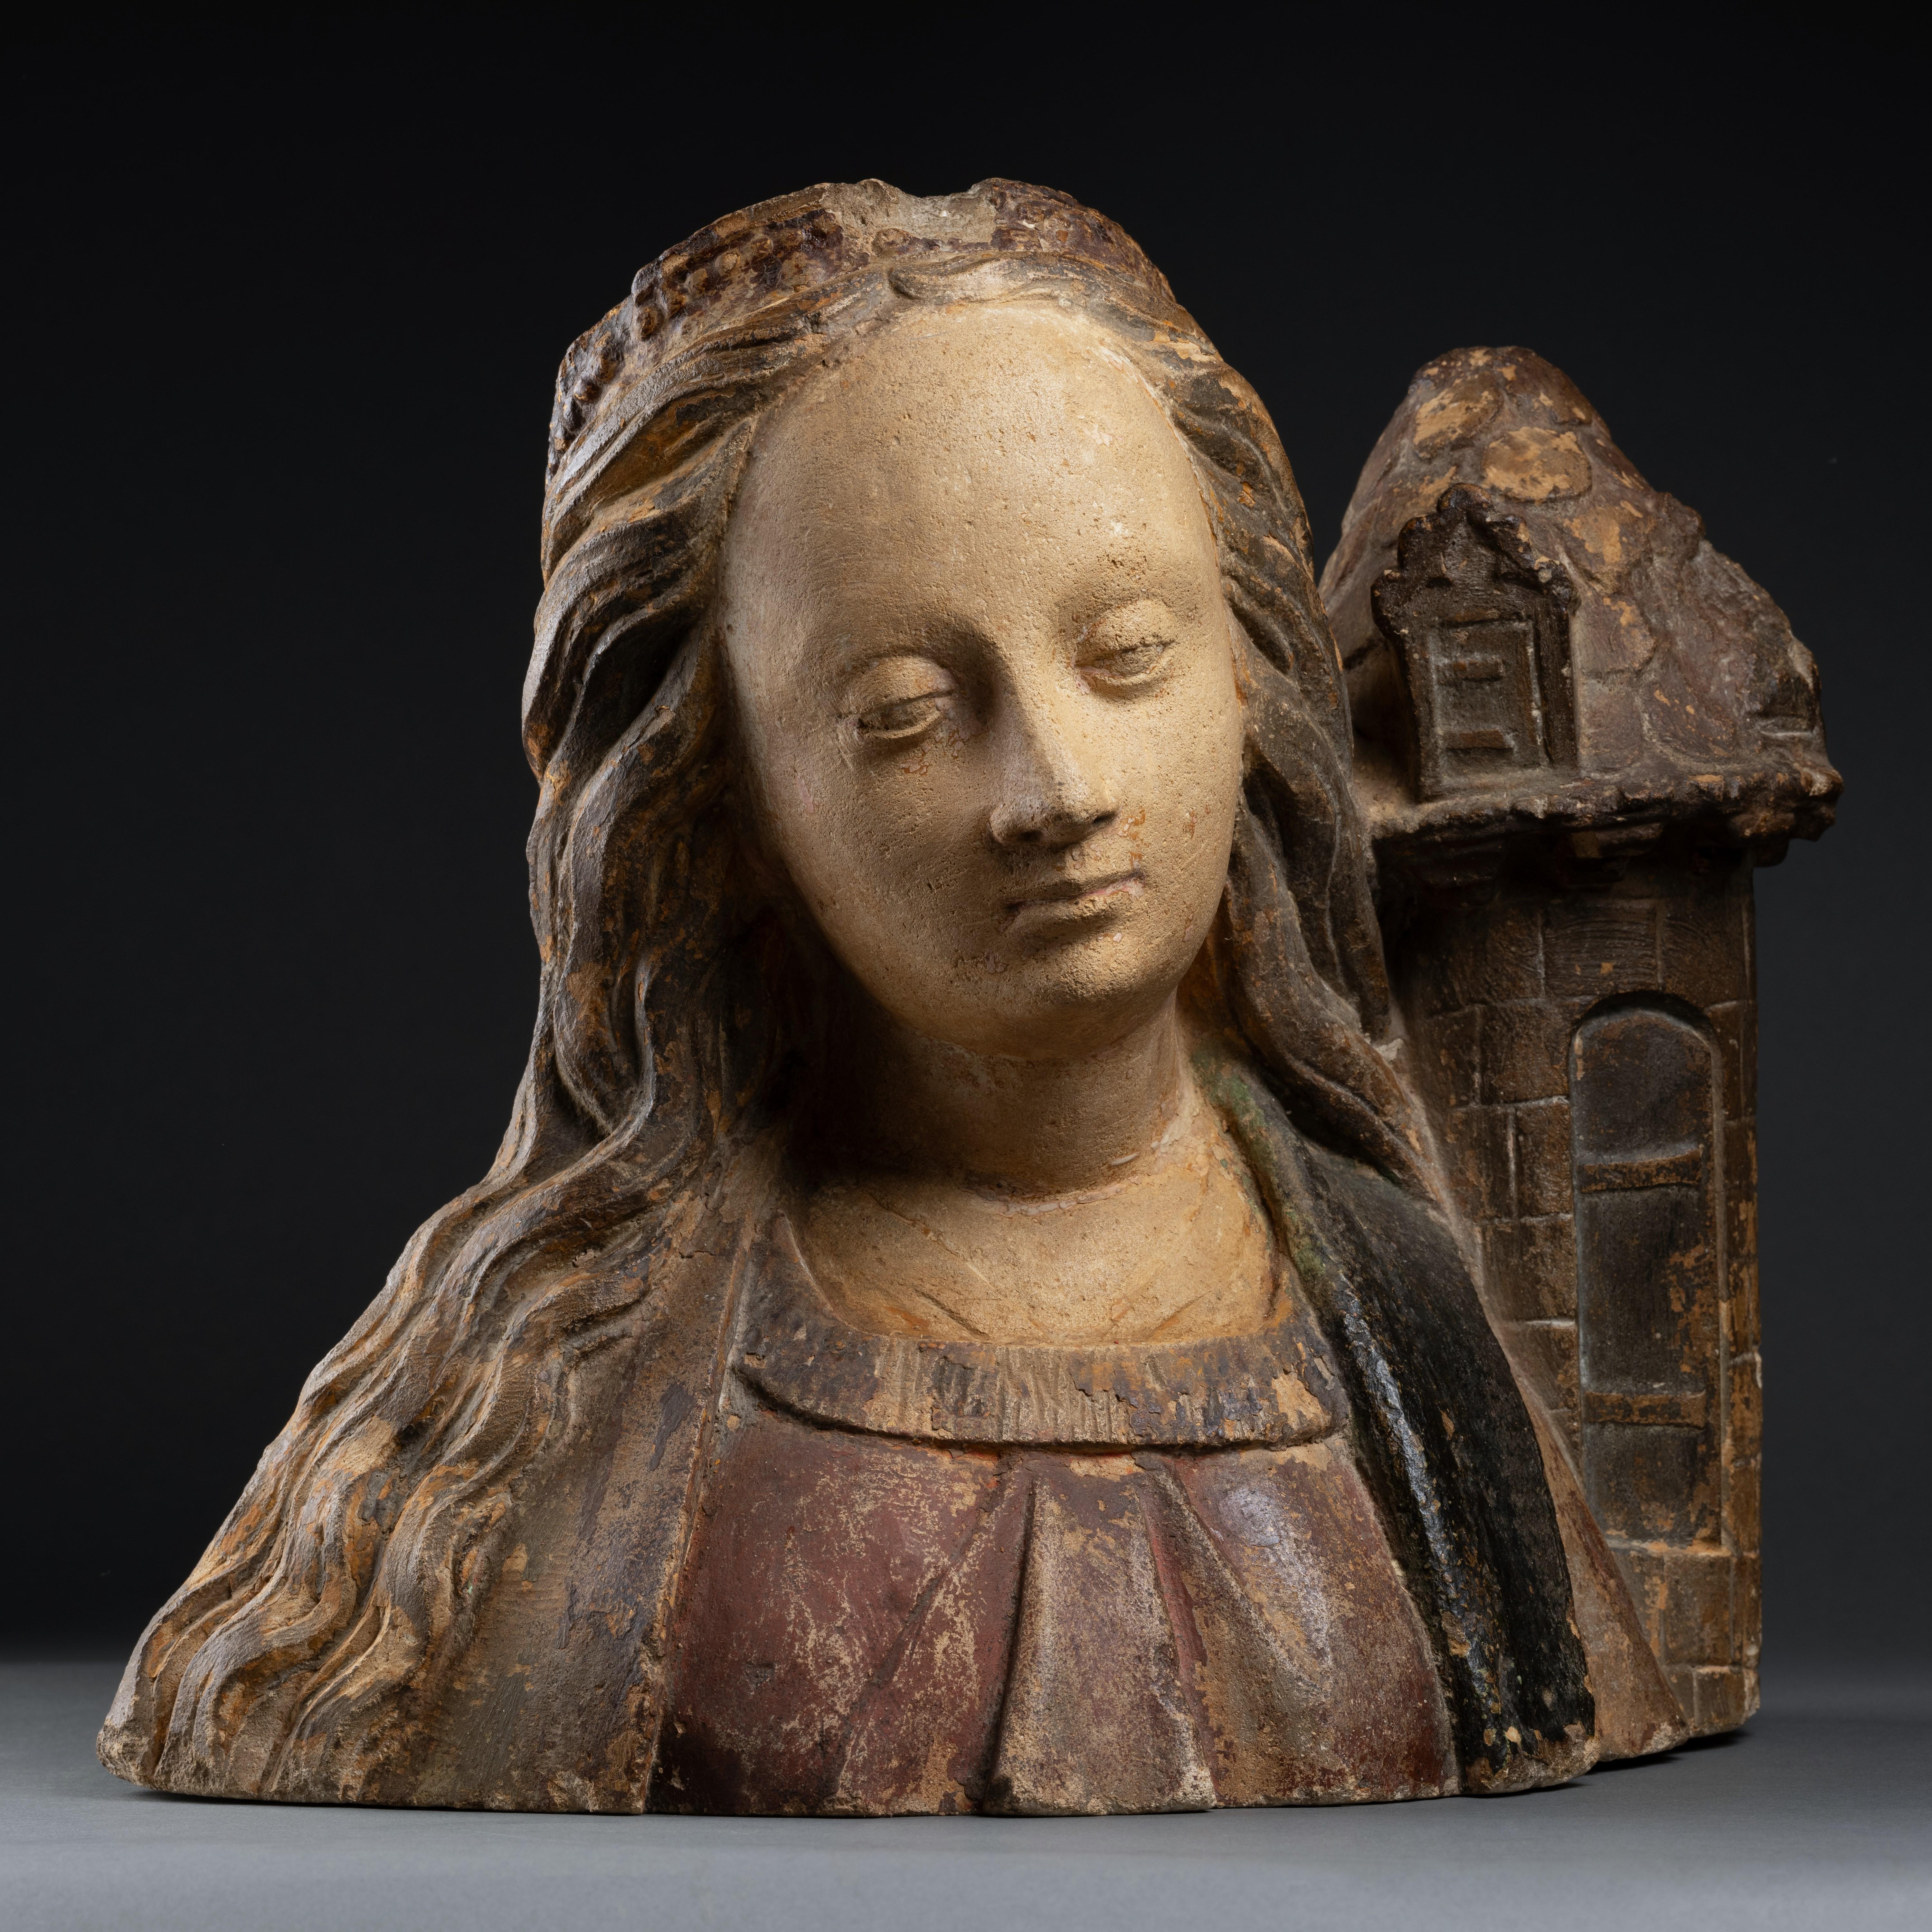 Hand-Carved Early 16th century bust of Saint Barbara, School of Troyes, Champagne